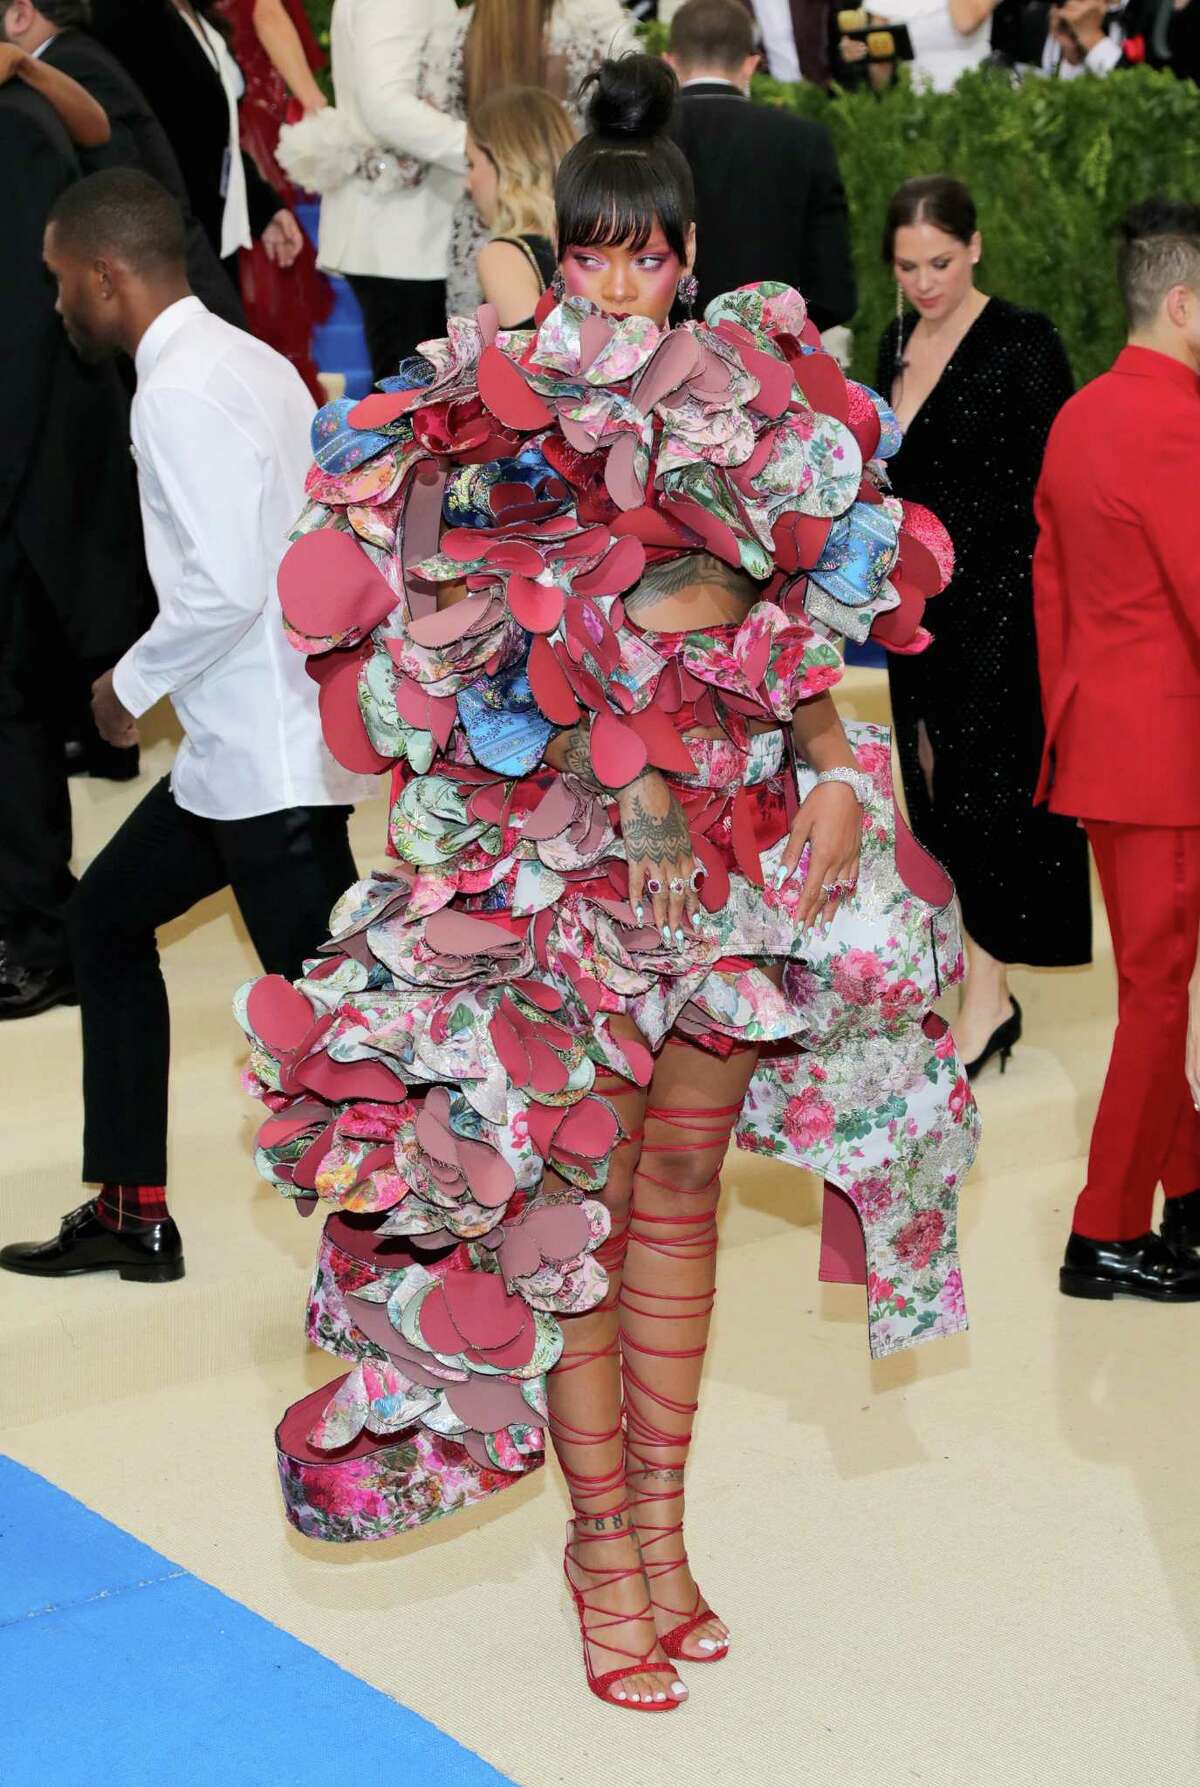 WHAT IS IT?: Rihanna ... A dress or confetti?